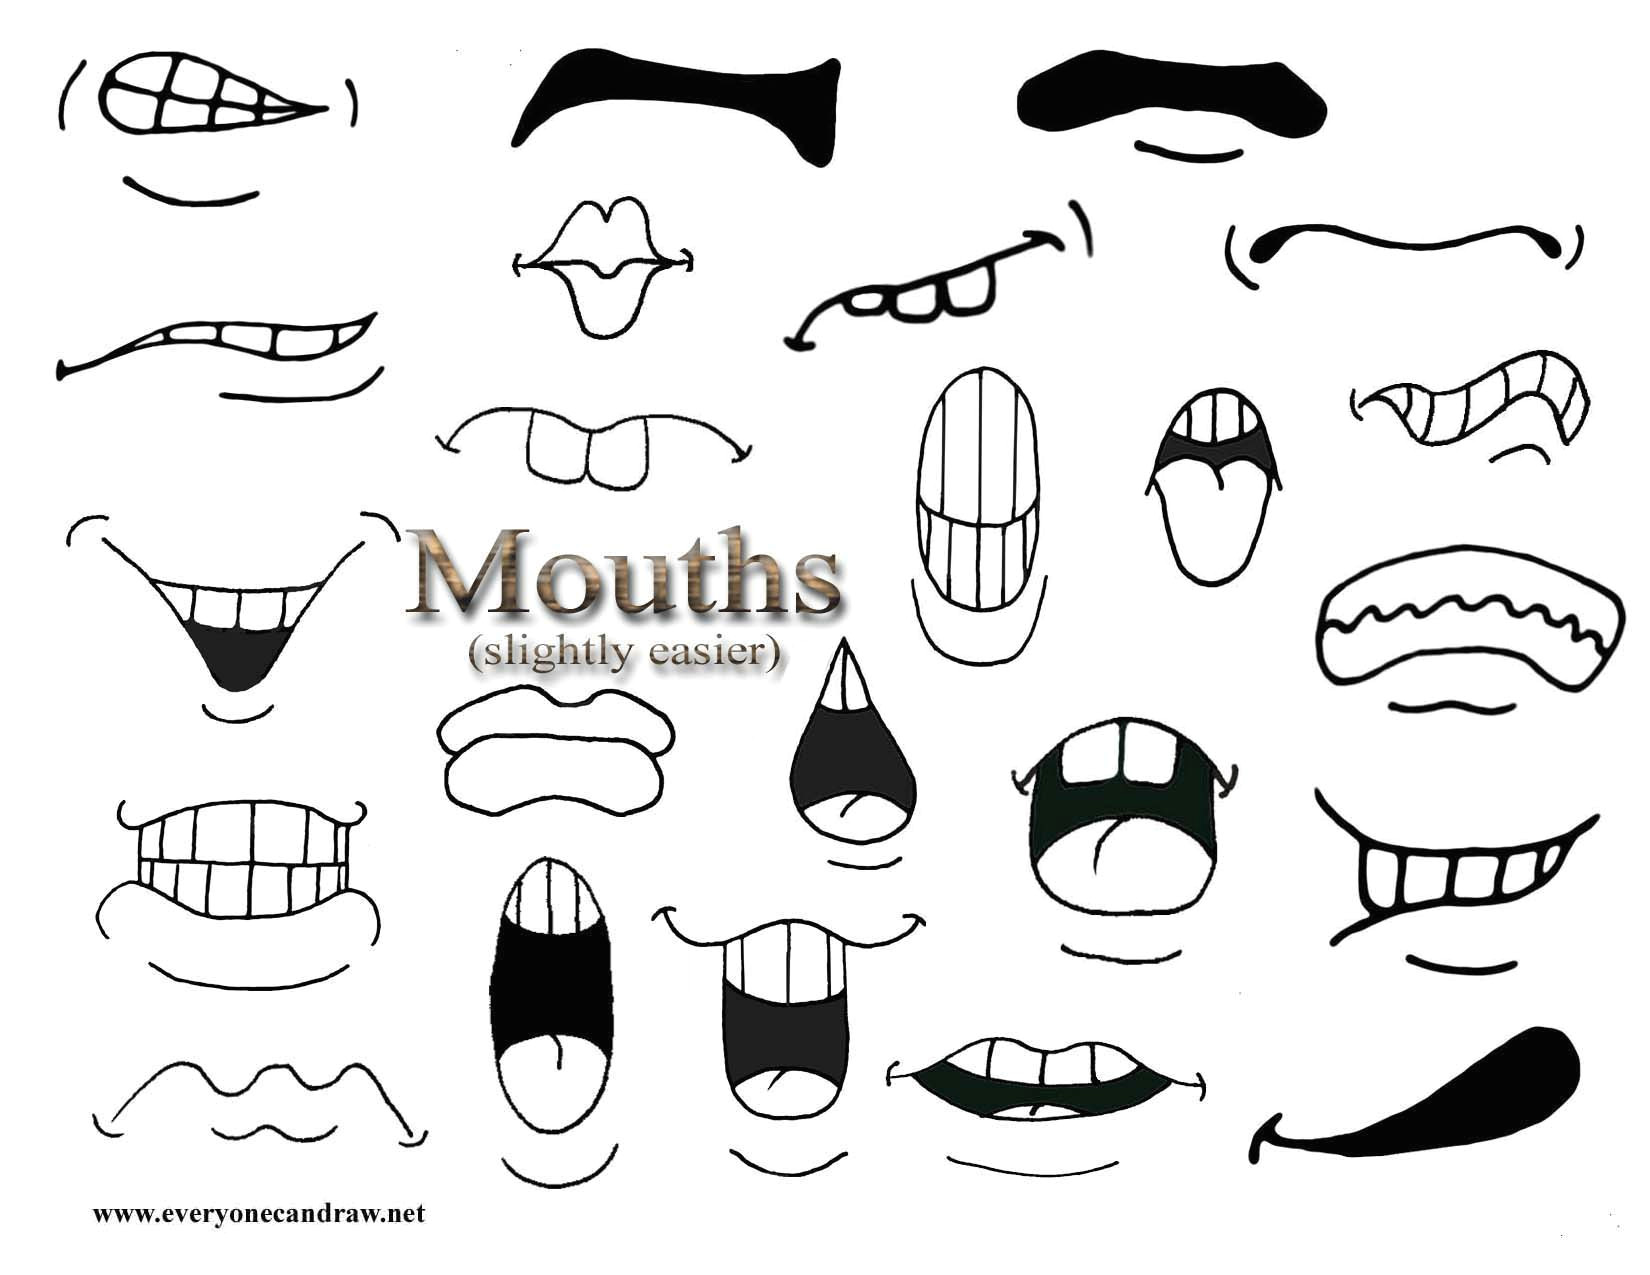 Drawing Cartoons Mouth Pictures Of Cartoon Mouths Group with 65 Items